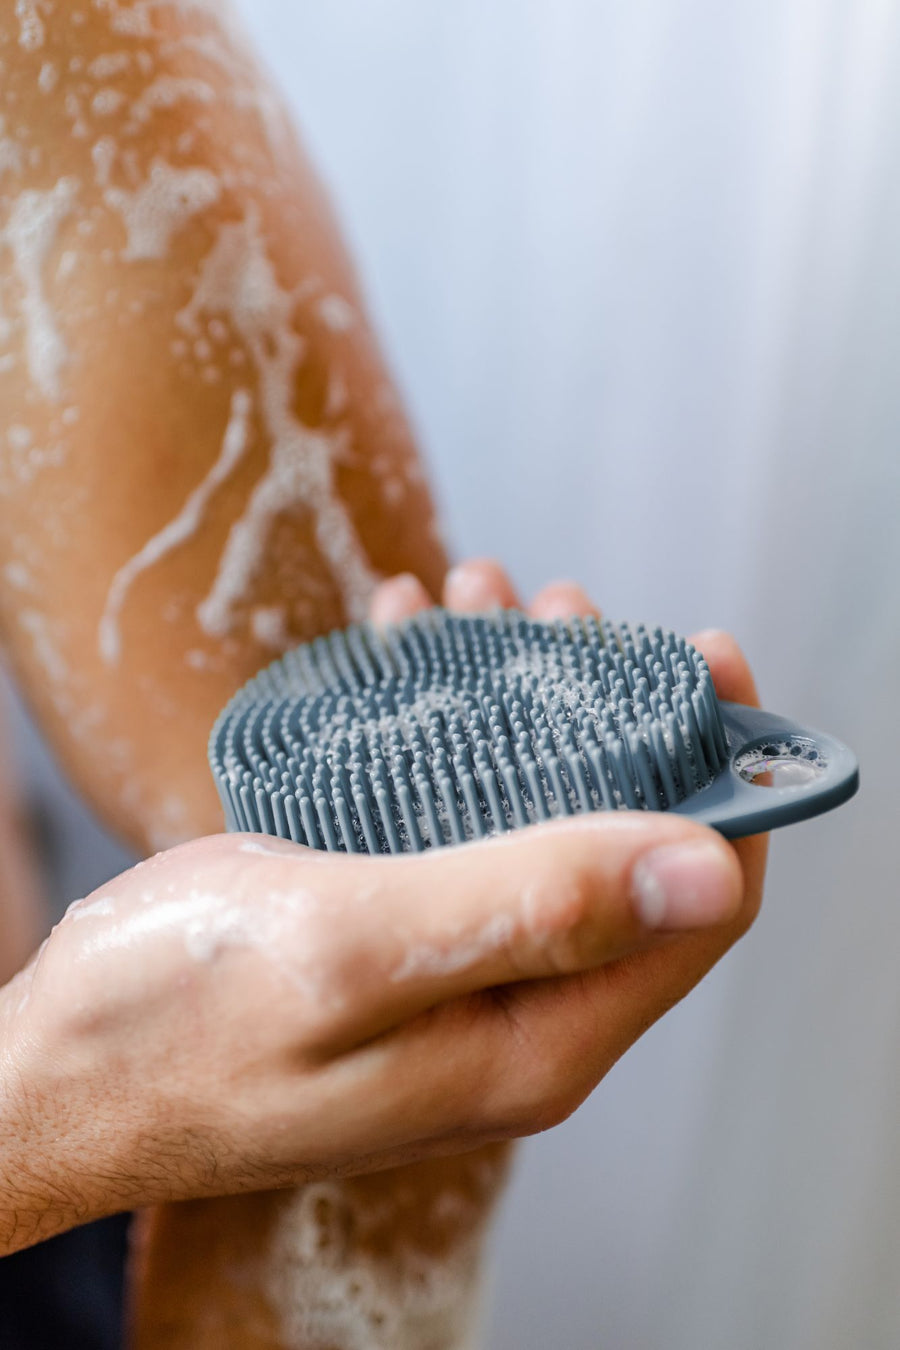 Man in shower holding silicone body scrub with soap on scrub and aarm.